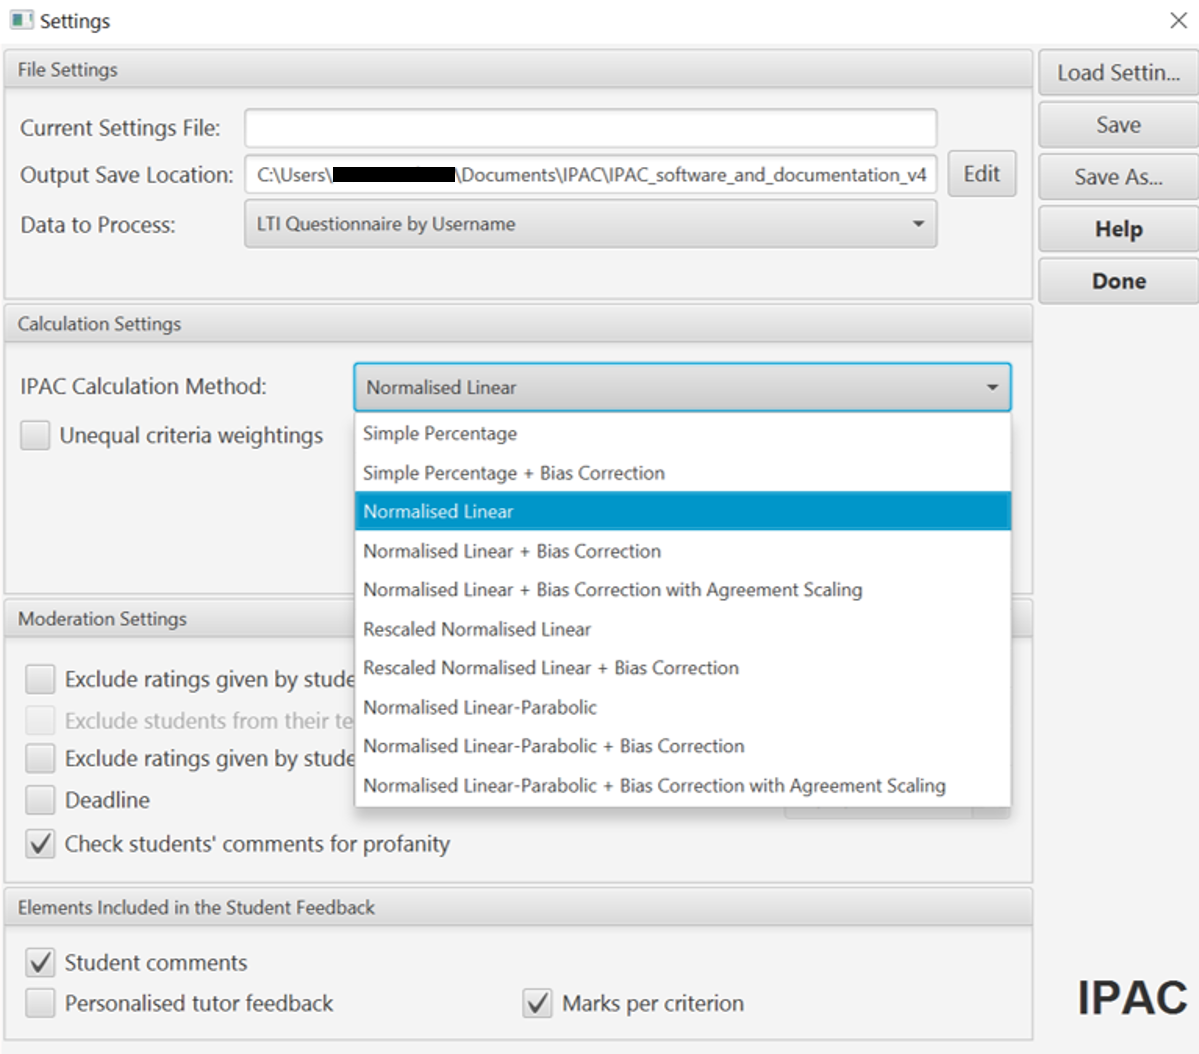 IPAC software Calculation Settings